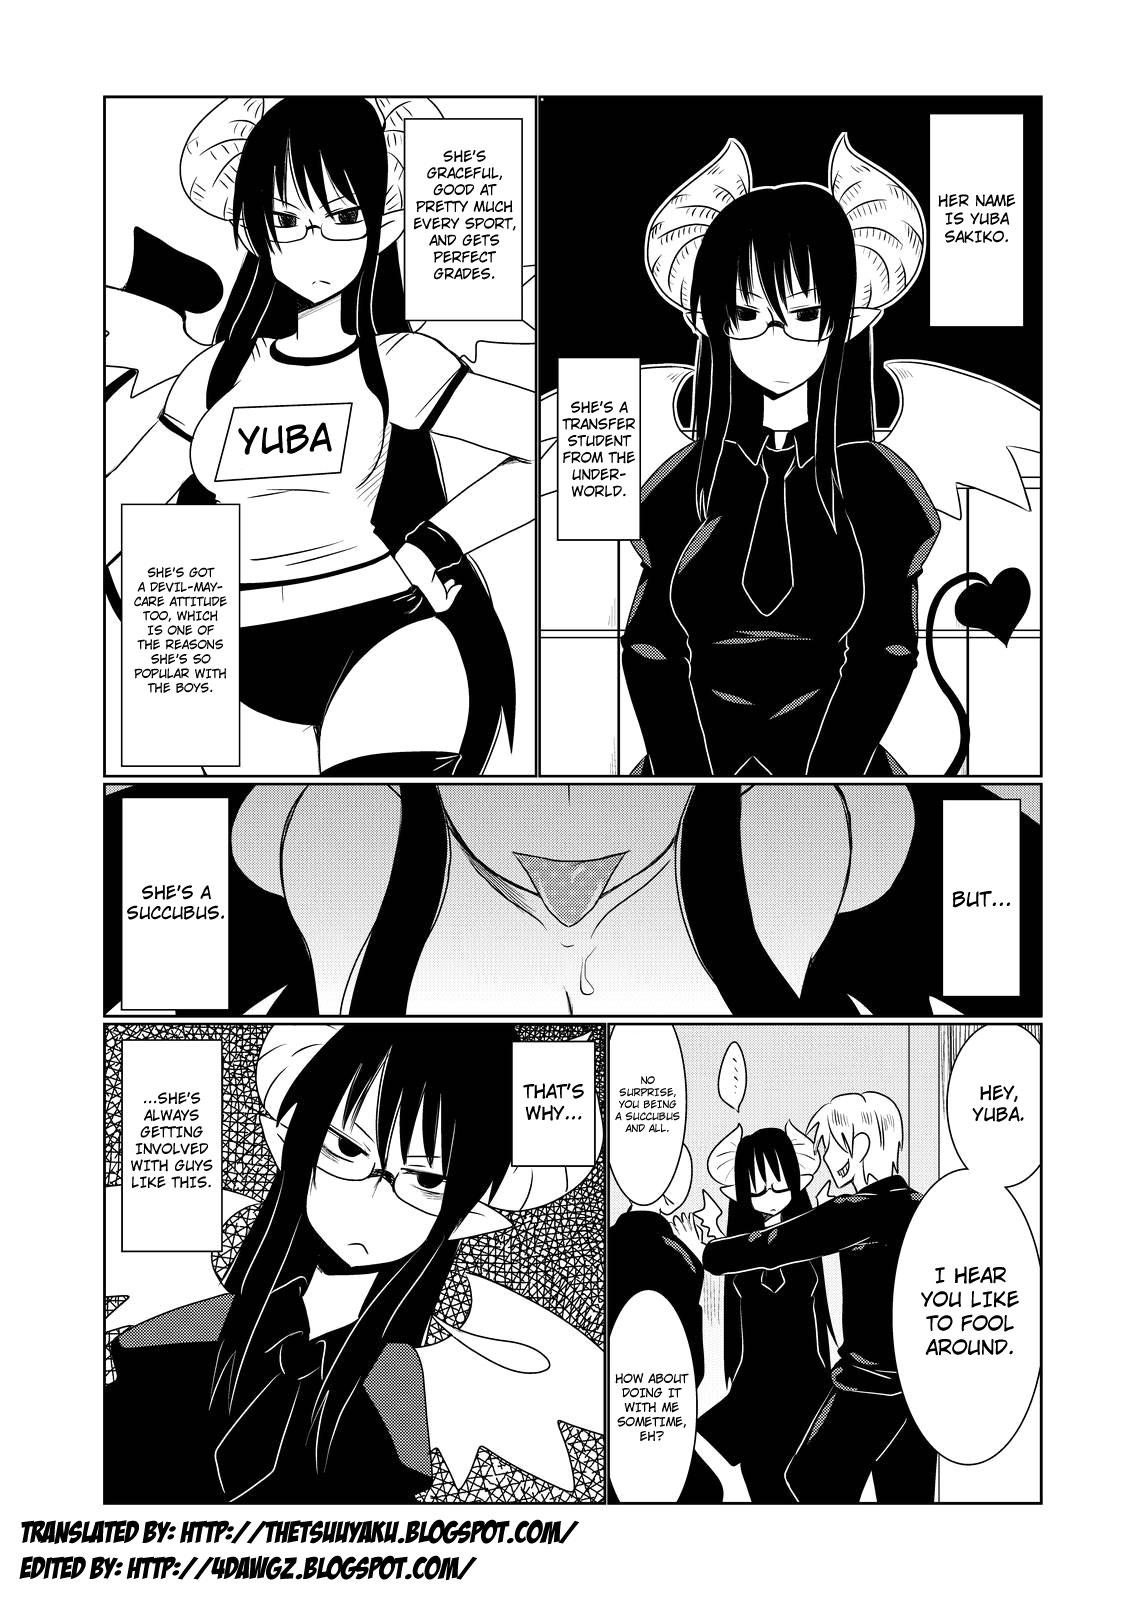 Dick Sucking JK Succubus no Renai Jijou. | Thoughts on Love by a Female High School Succubus Tight - Page 2